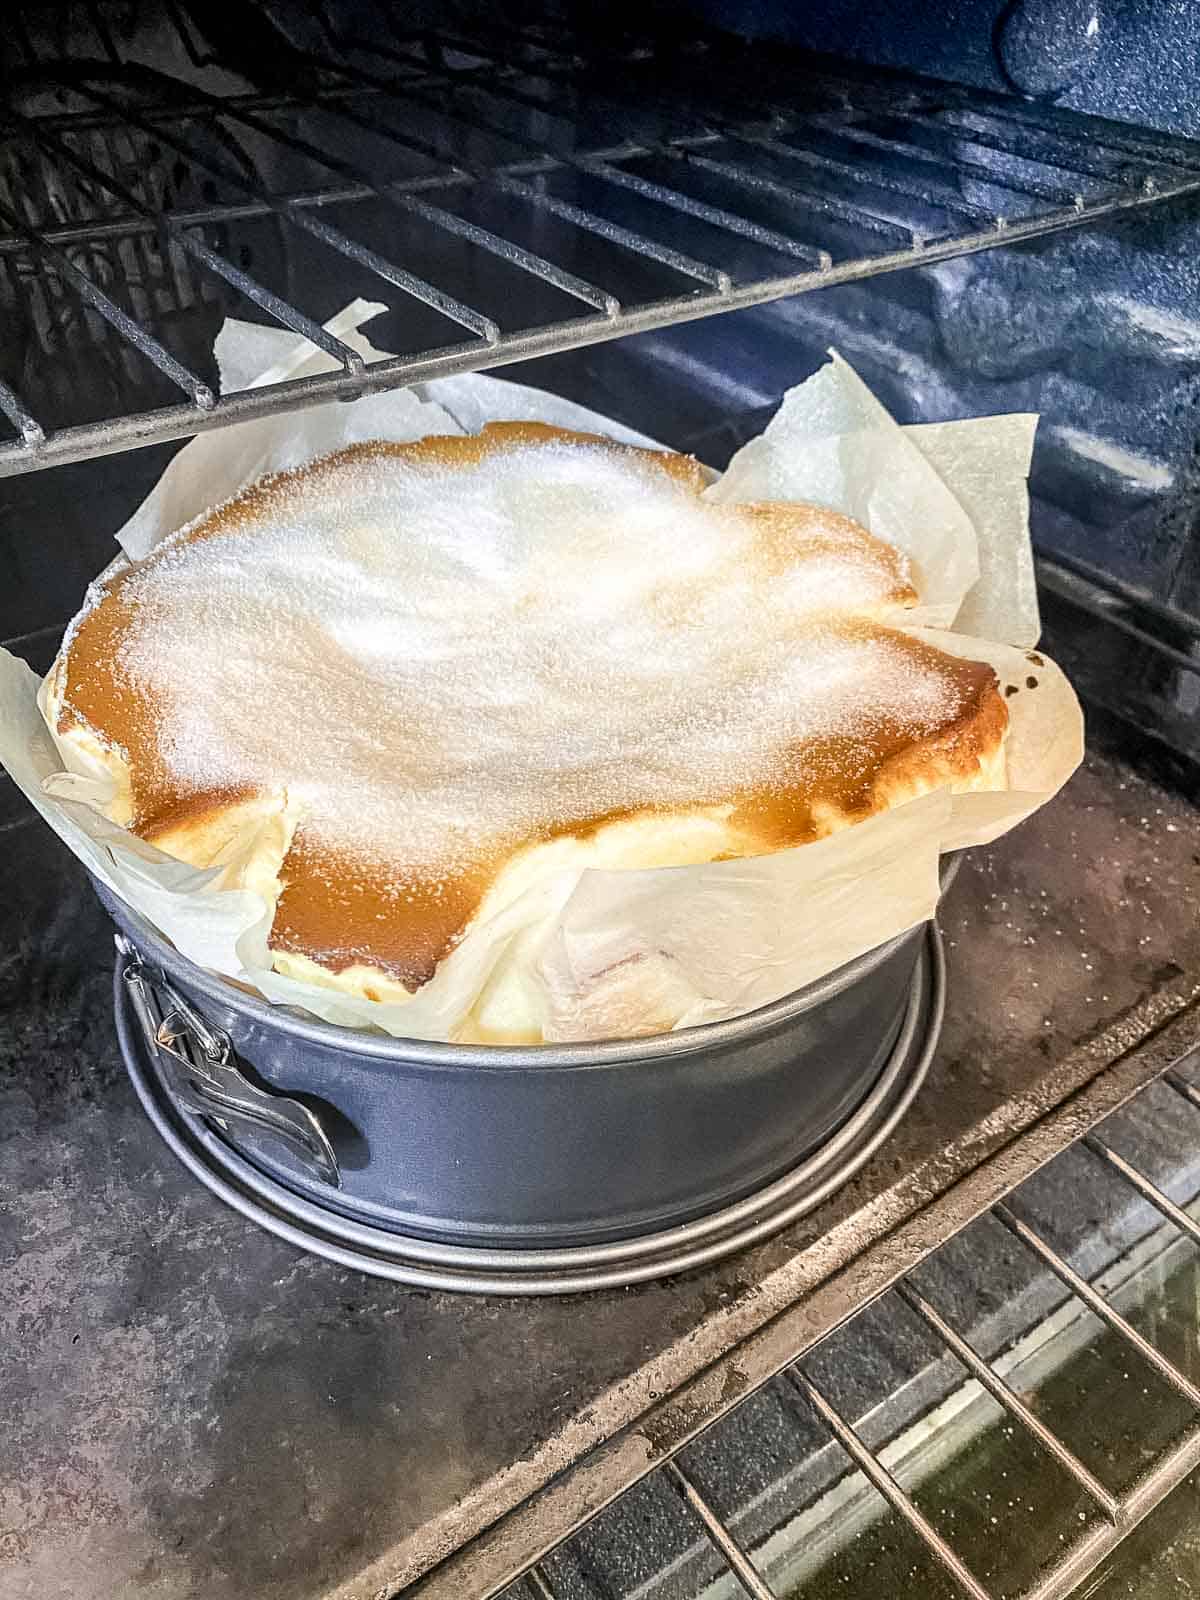 Risen Cooked Basque Cheesecake in the oven